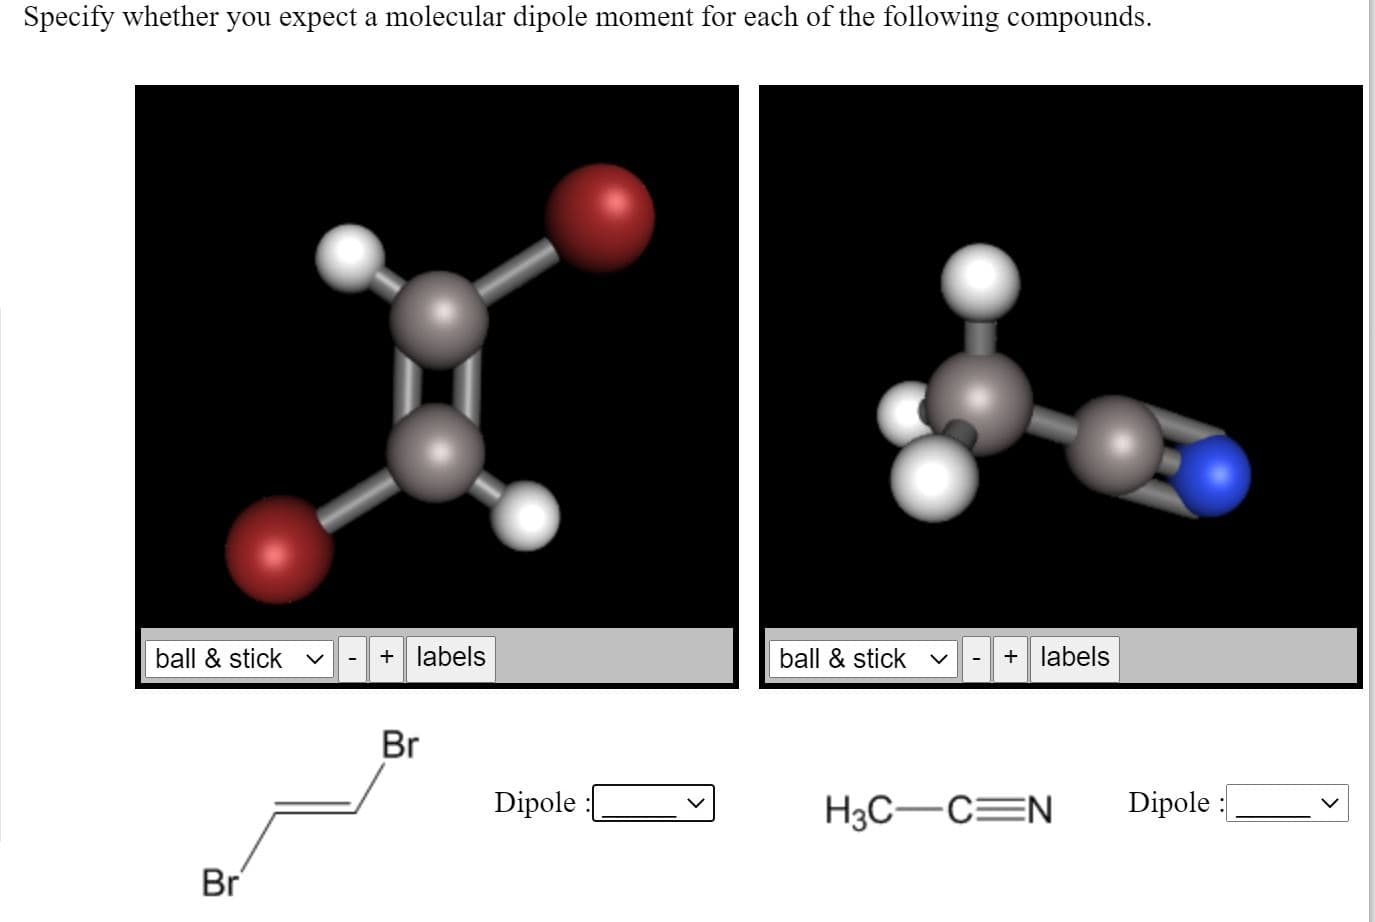 Specify whether you expect a molecular dipole moment for each of the following compounds.
ball & stick v
+ labels
ball & stick
+ labels
Br
Dipole
H3C-C=N
Dipole :
Br
